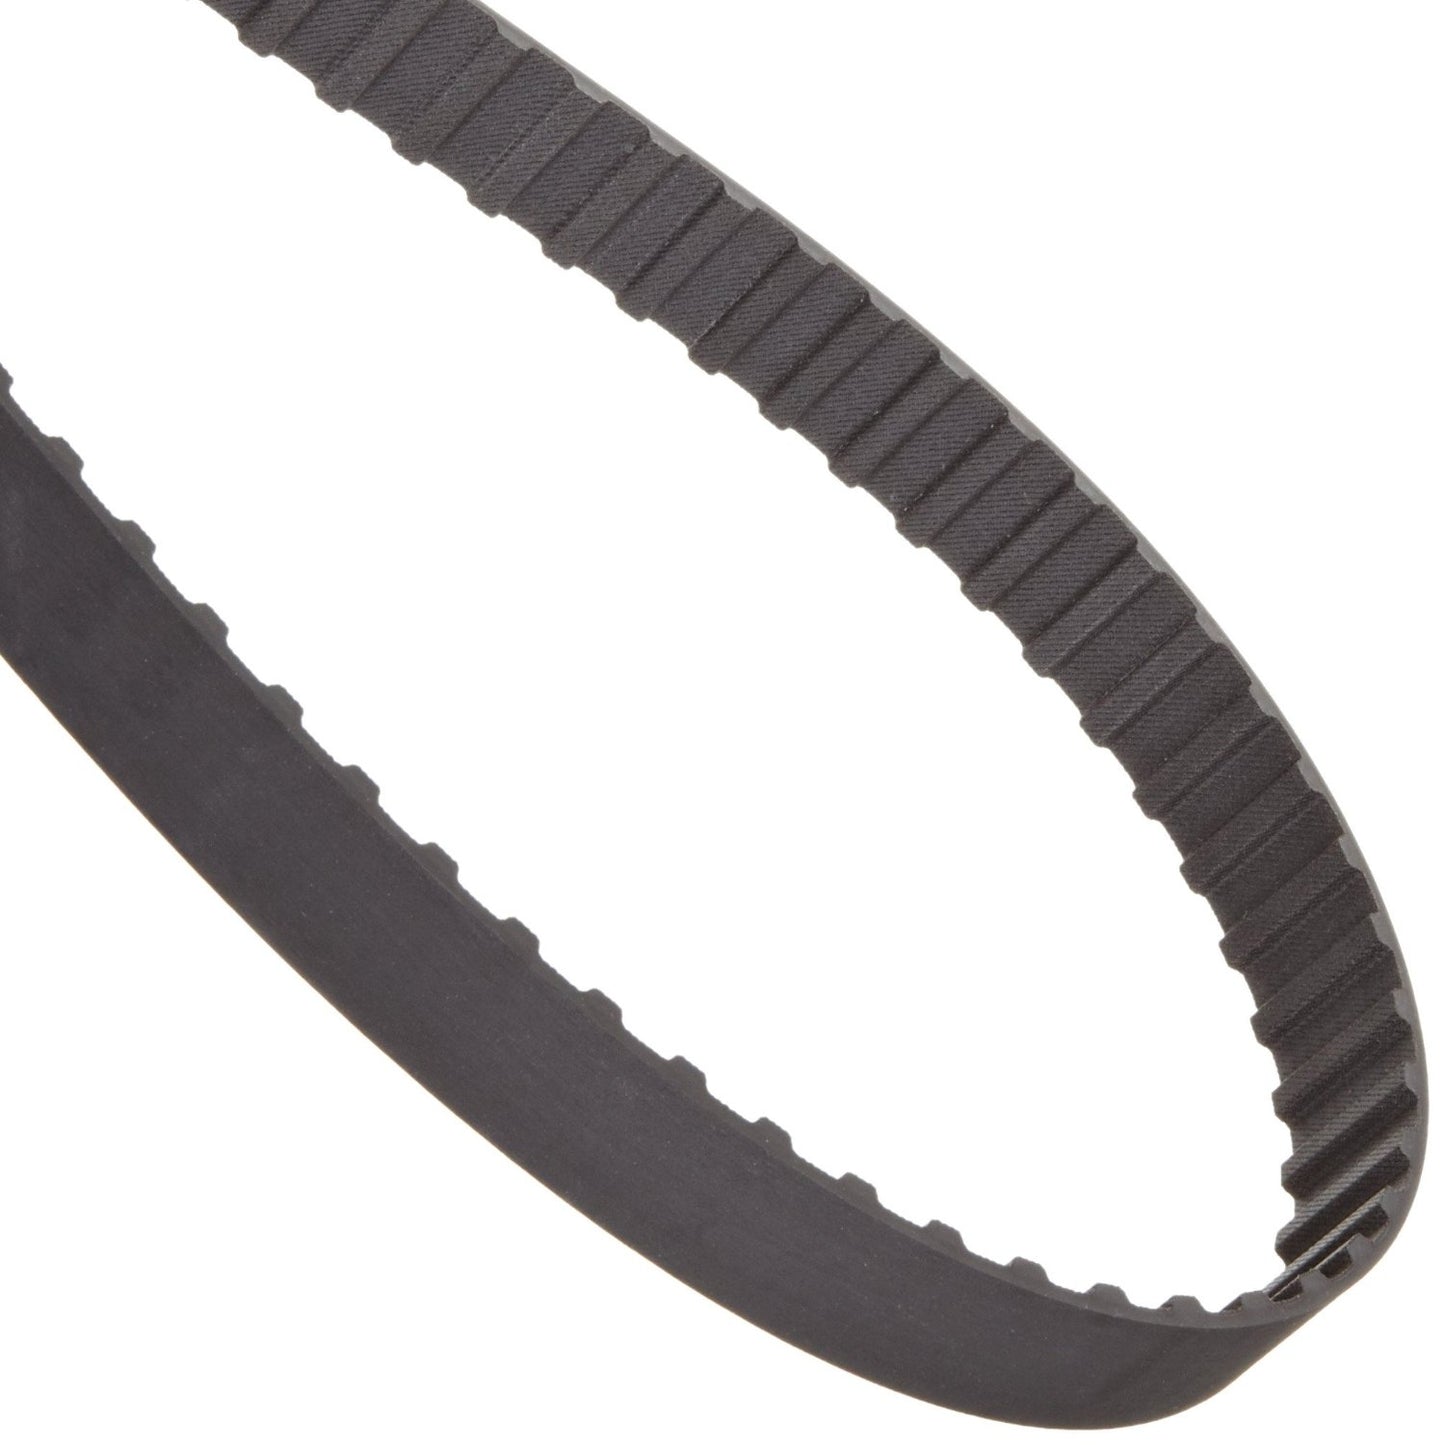 Westbend breadmaker Toothed Drive Belt 41042